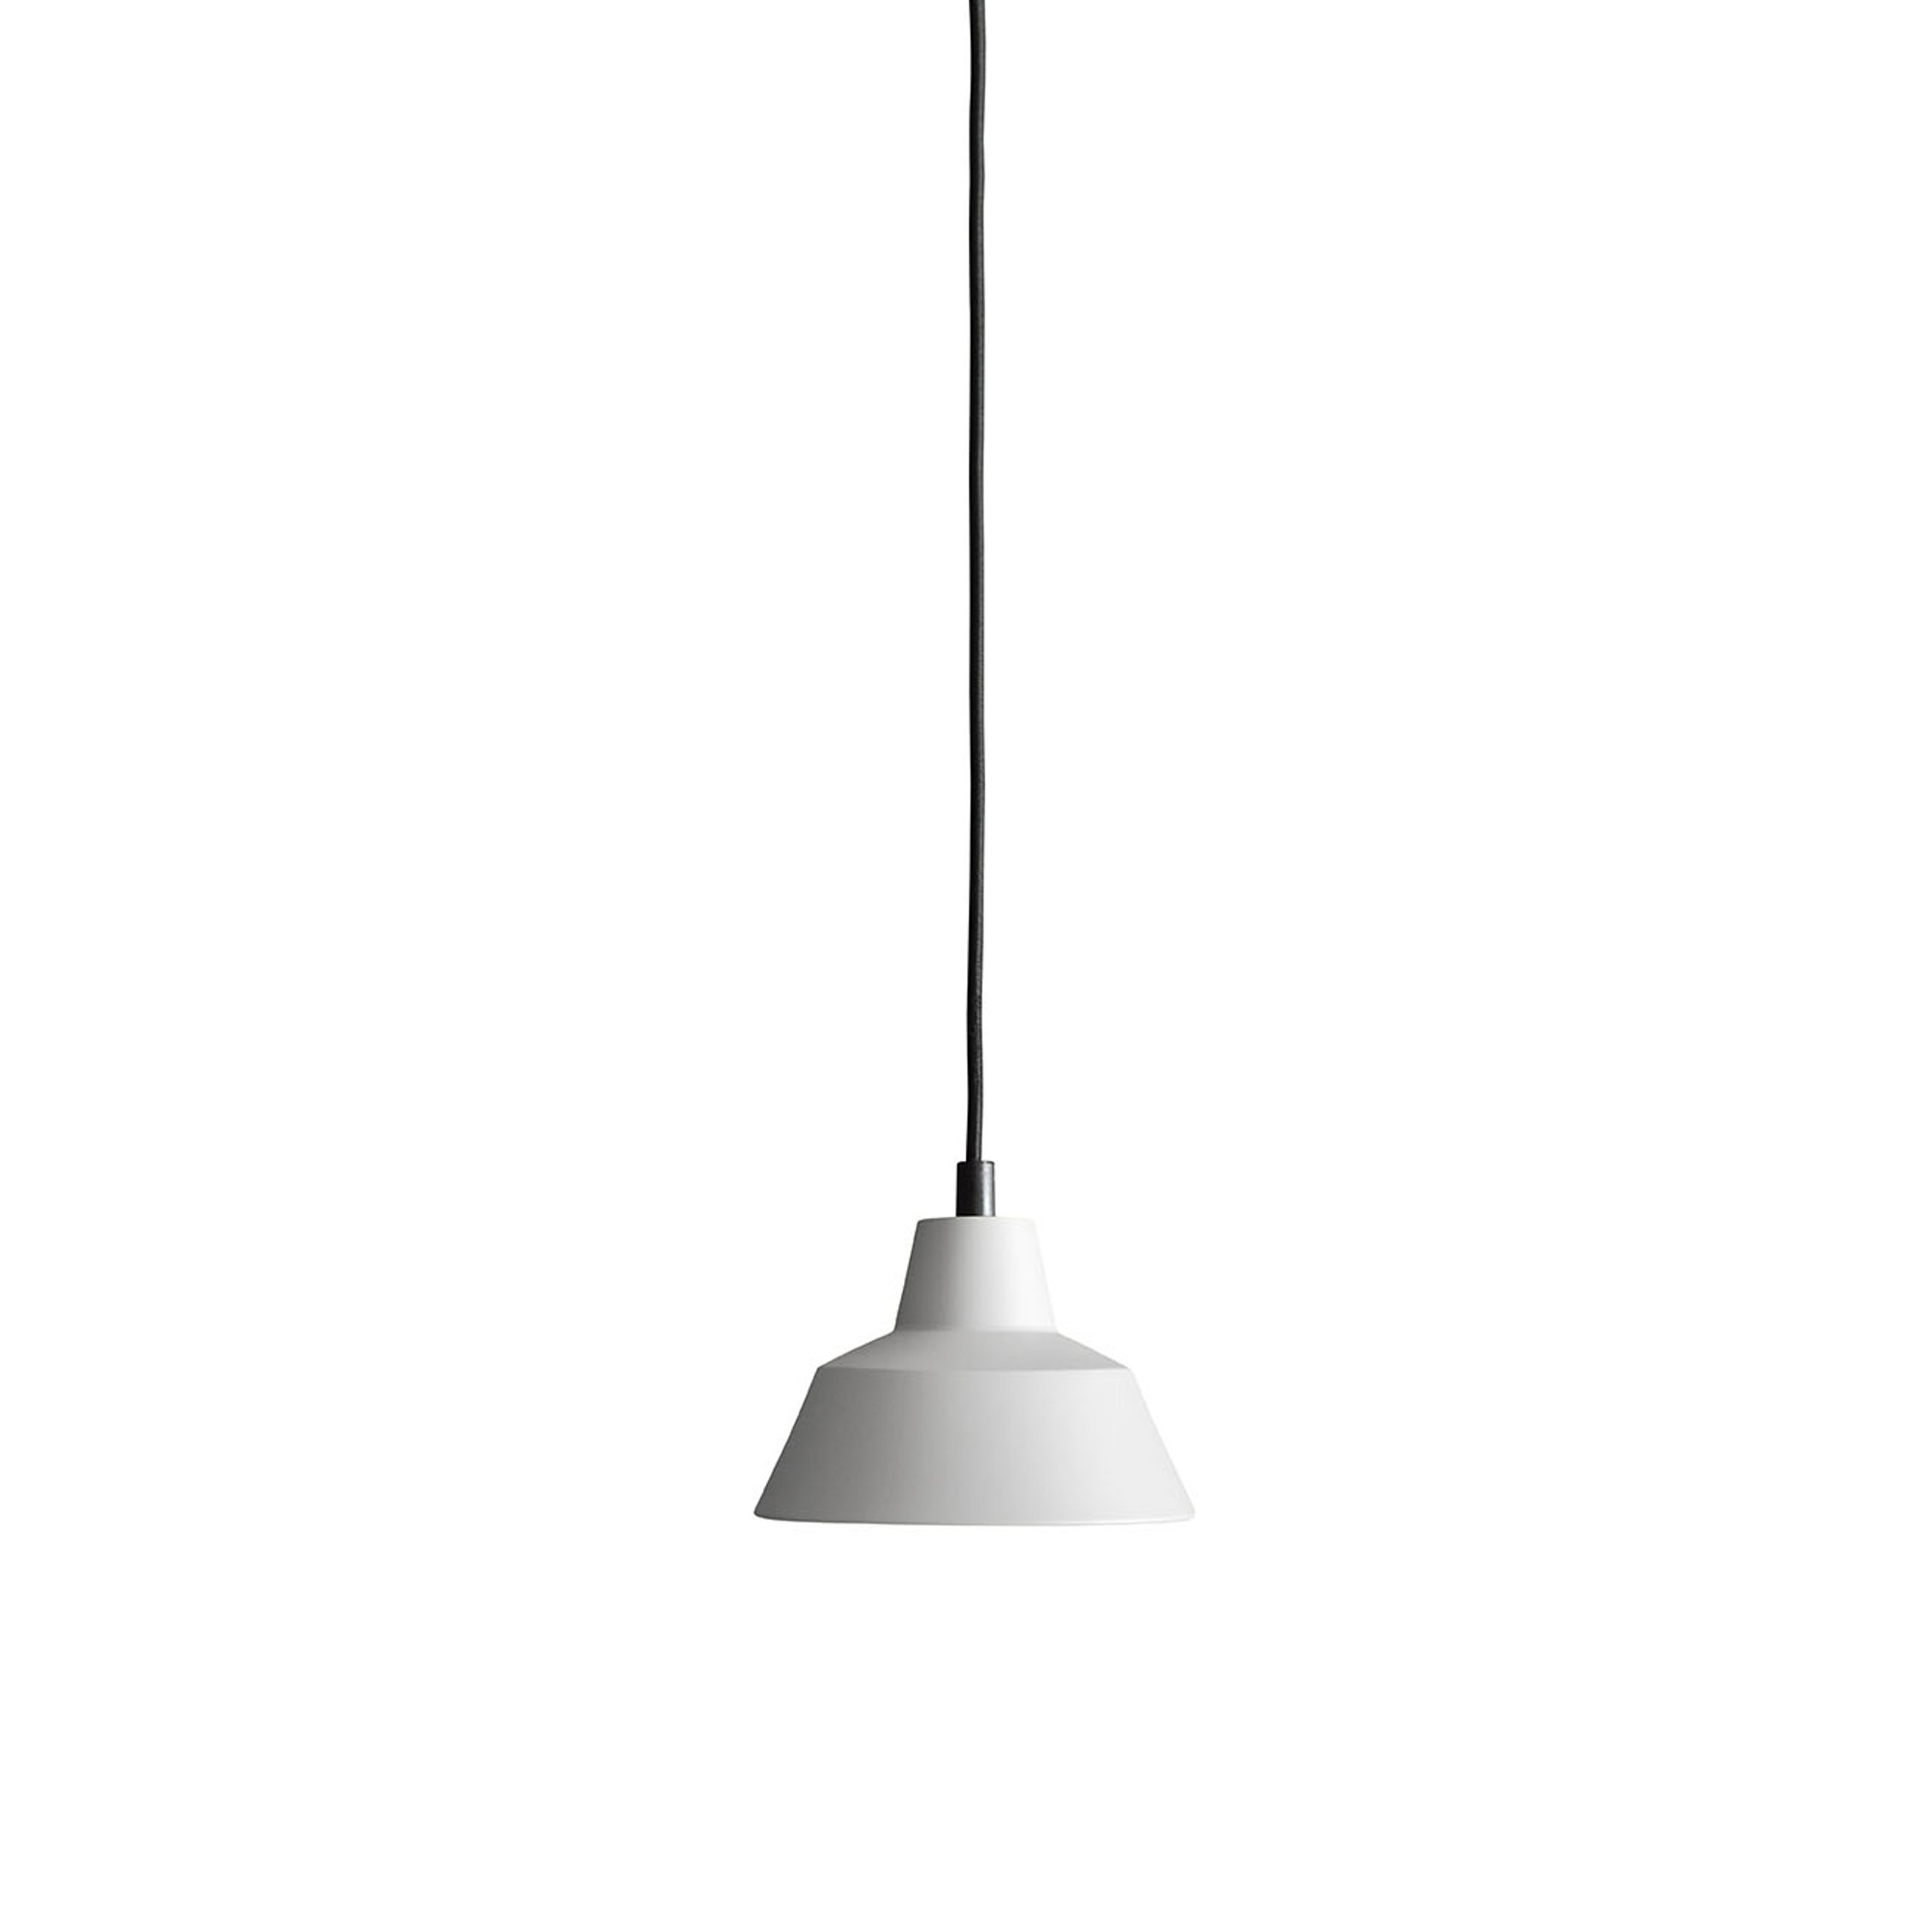 Made By Hand Workshop Lamp Pendant Grey W1